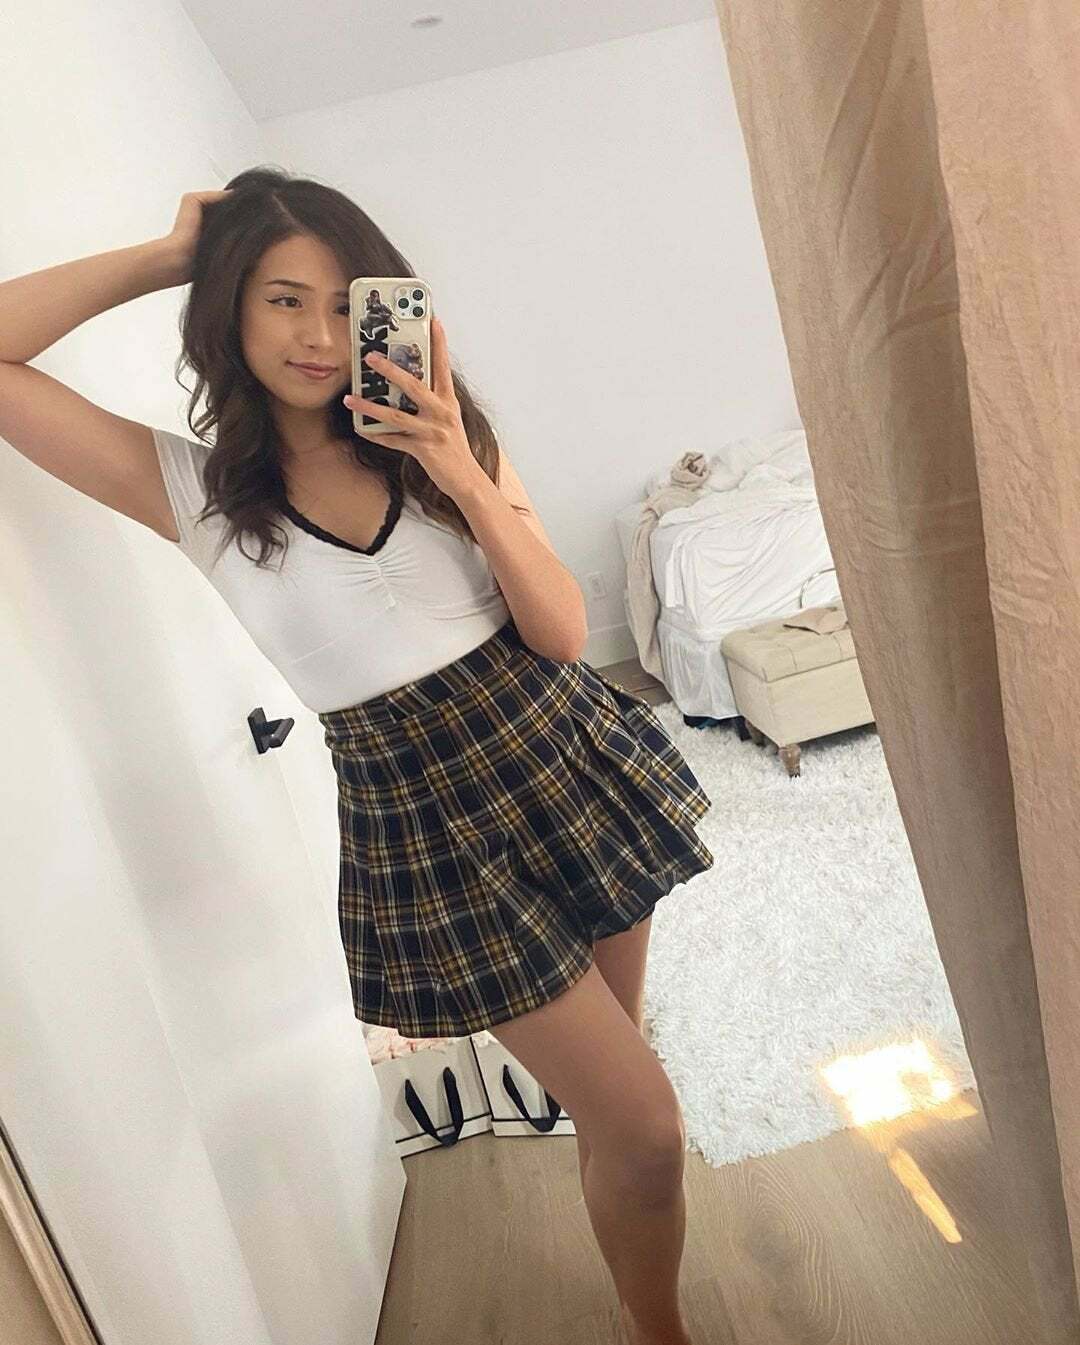 How would you fuck Pokimane?